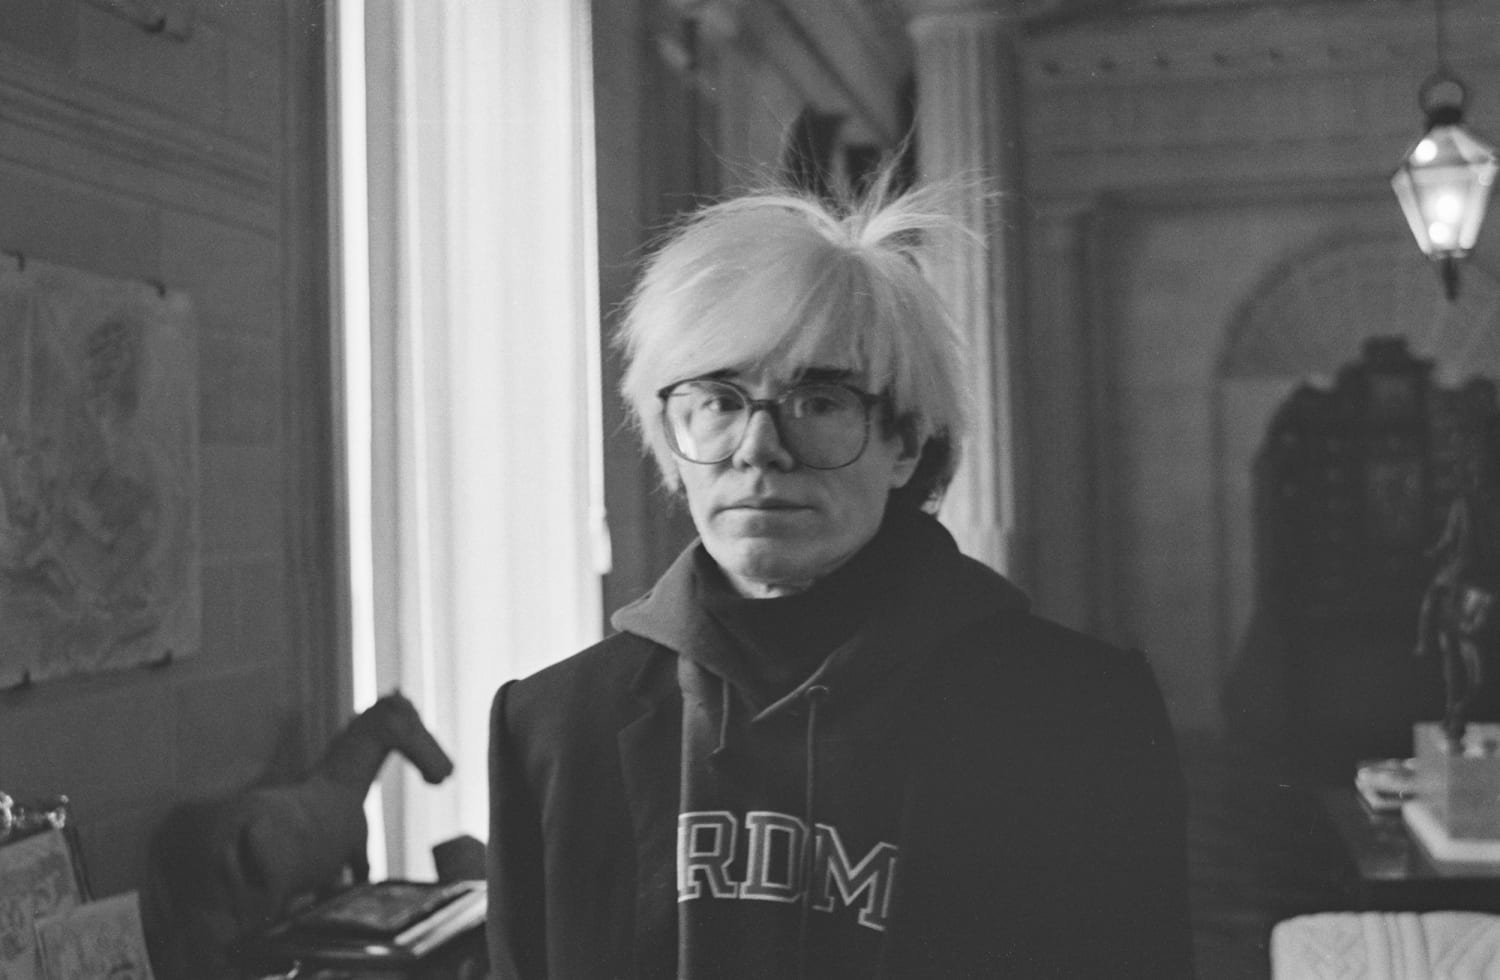 Andy Warhol Diaries' explores how the iconic was shaped his great loves